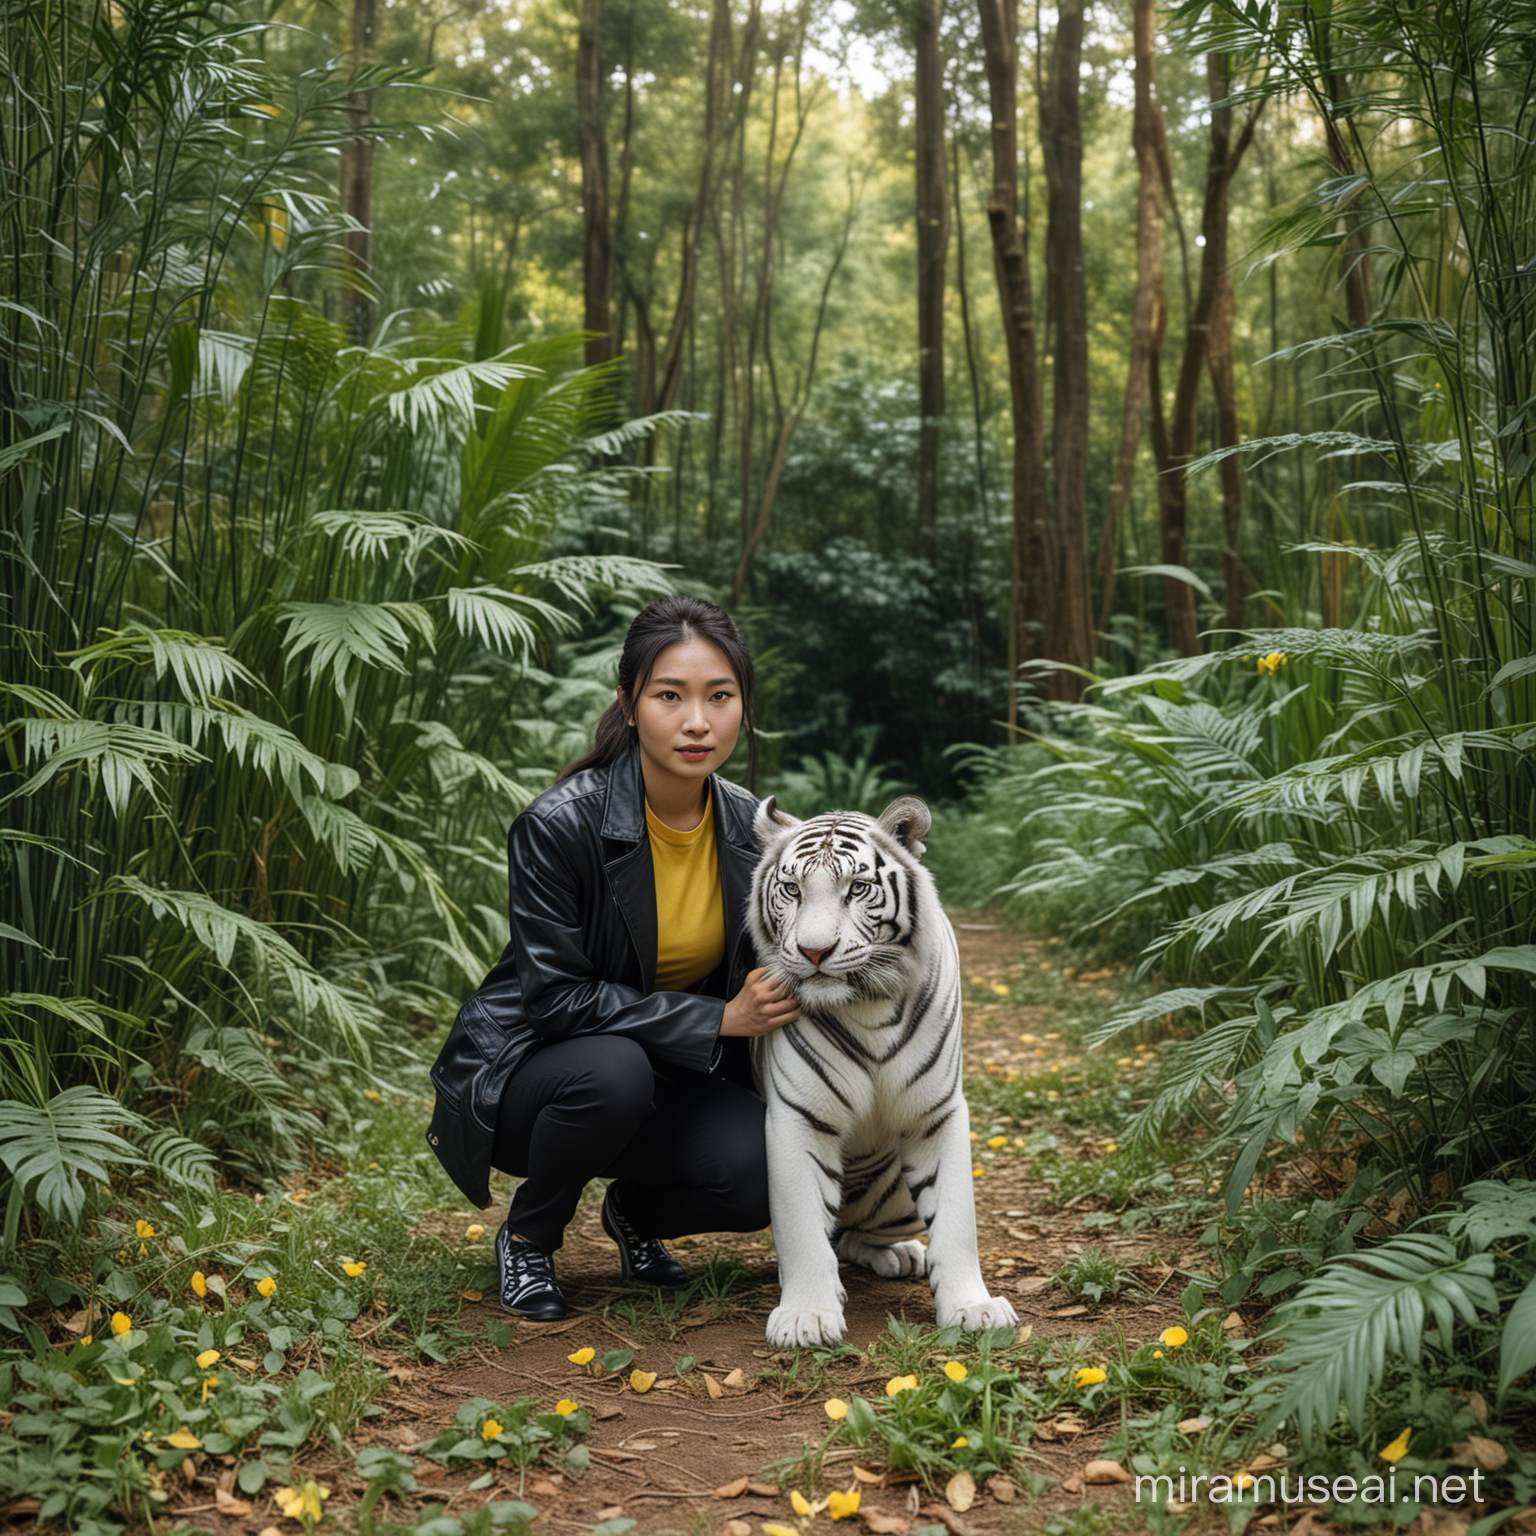 an Asian woman, squatting on the ground. The individual was wearing a black jacket with yellow accents and black trousers. In front of the individual, there was a white tiger cub with black stripes that looked calm. The tiger has pure white fur with blue eyes and small ears. The background of the image is a forest with large trees and other green plants. 🌳🐅